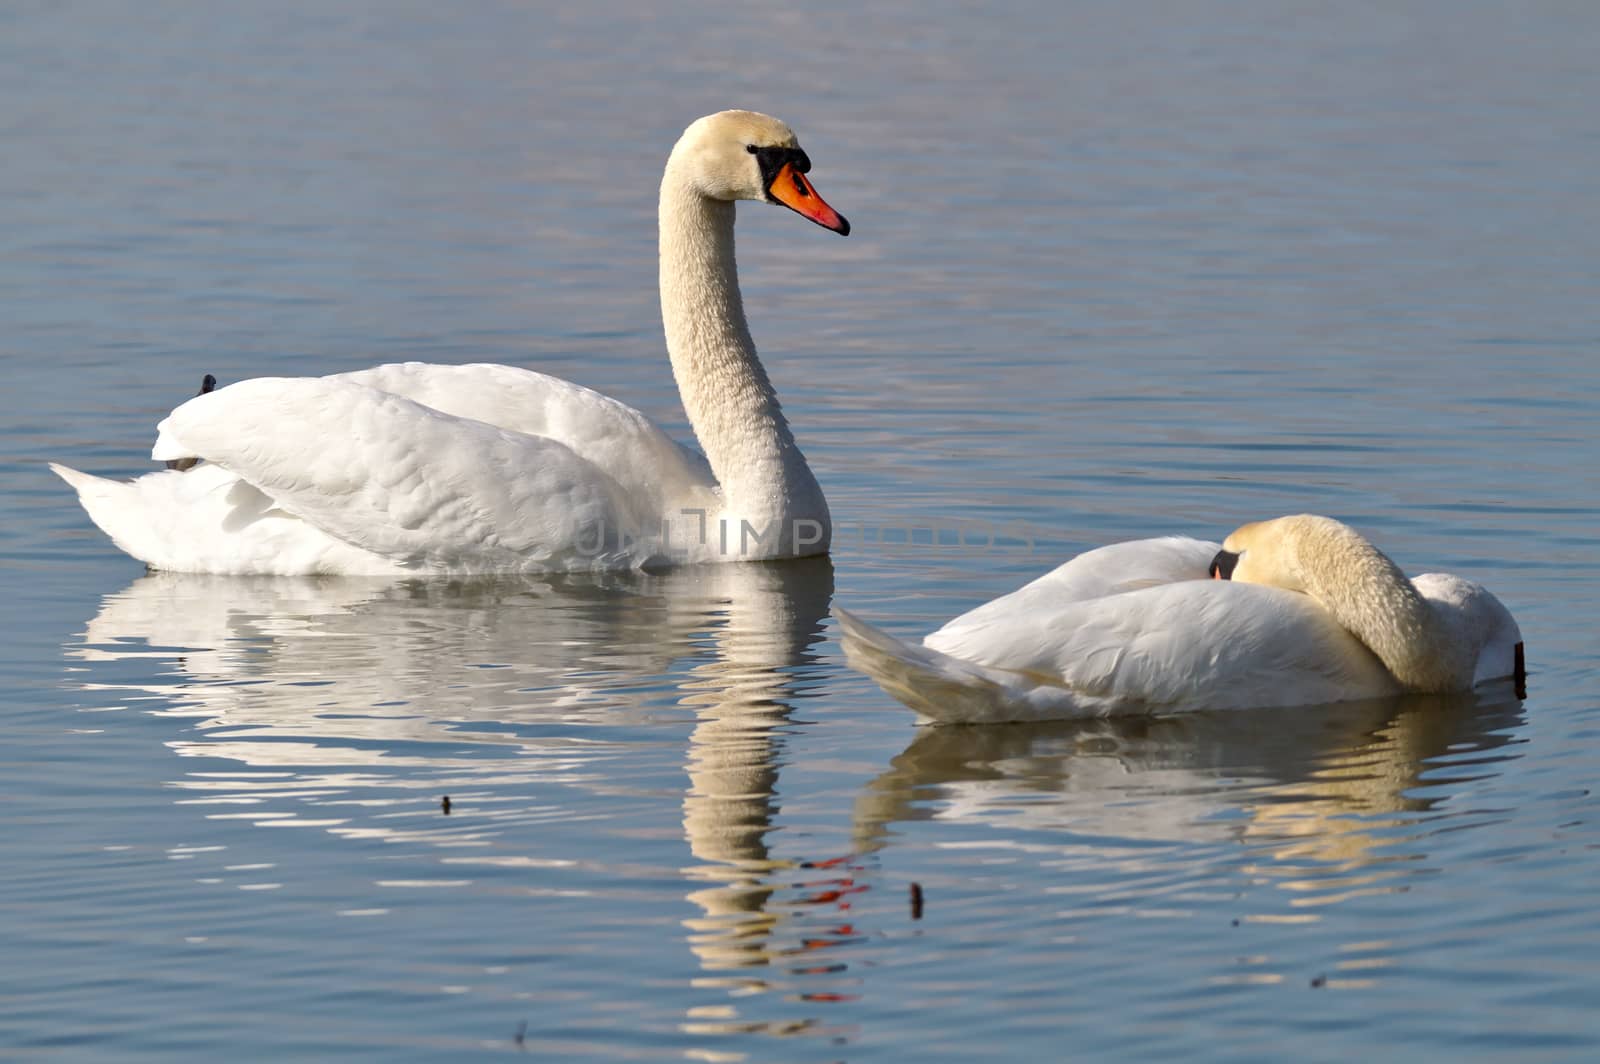 Male Mute Swan guarding while female is sleeping on the water.